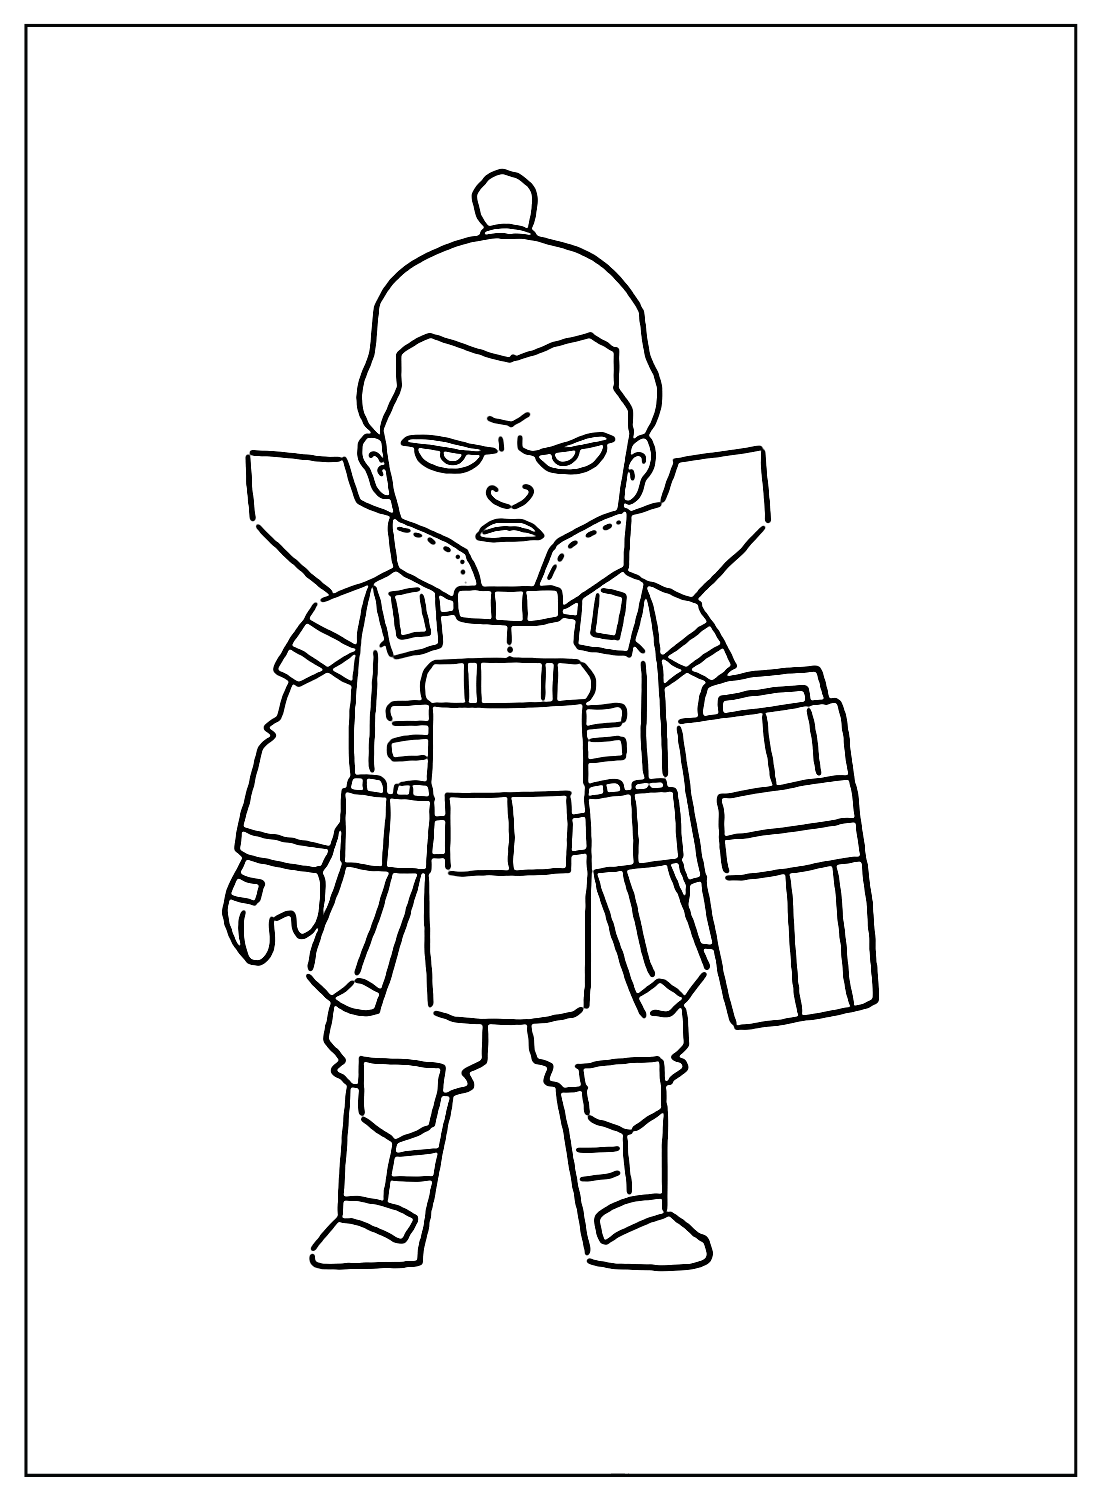 Coloring Pages Gibraltar Apex Legends from Apex Legends